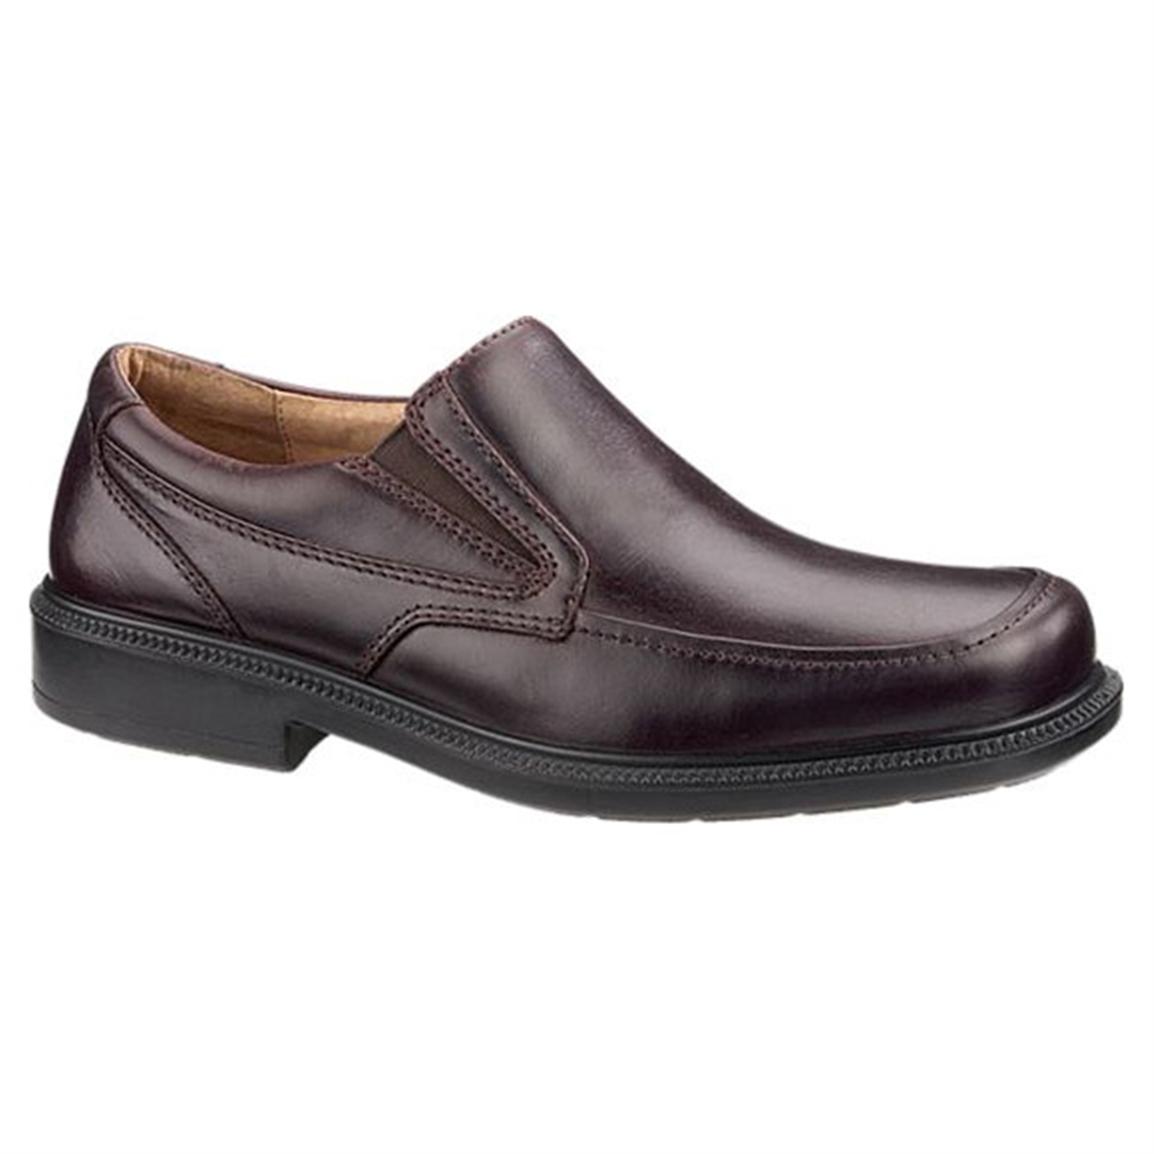 Men's Hush PuppiesÂ® Leverage Shoes - 164469, Casual Shoes at ...